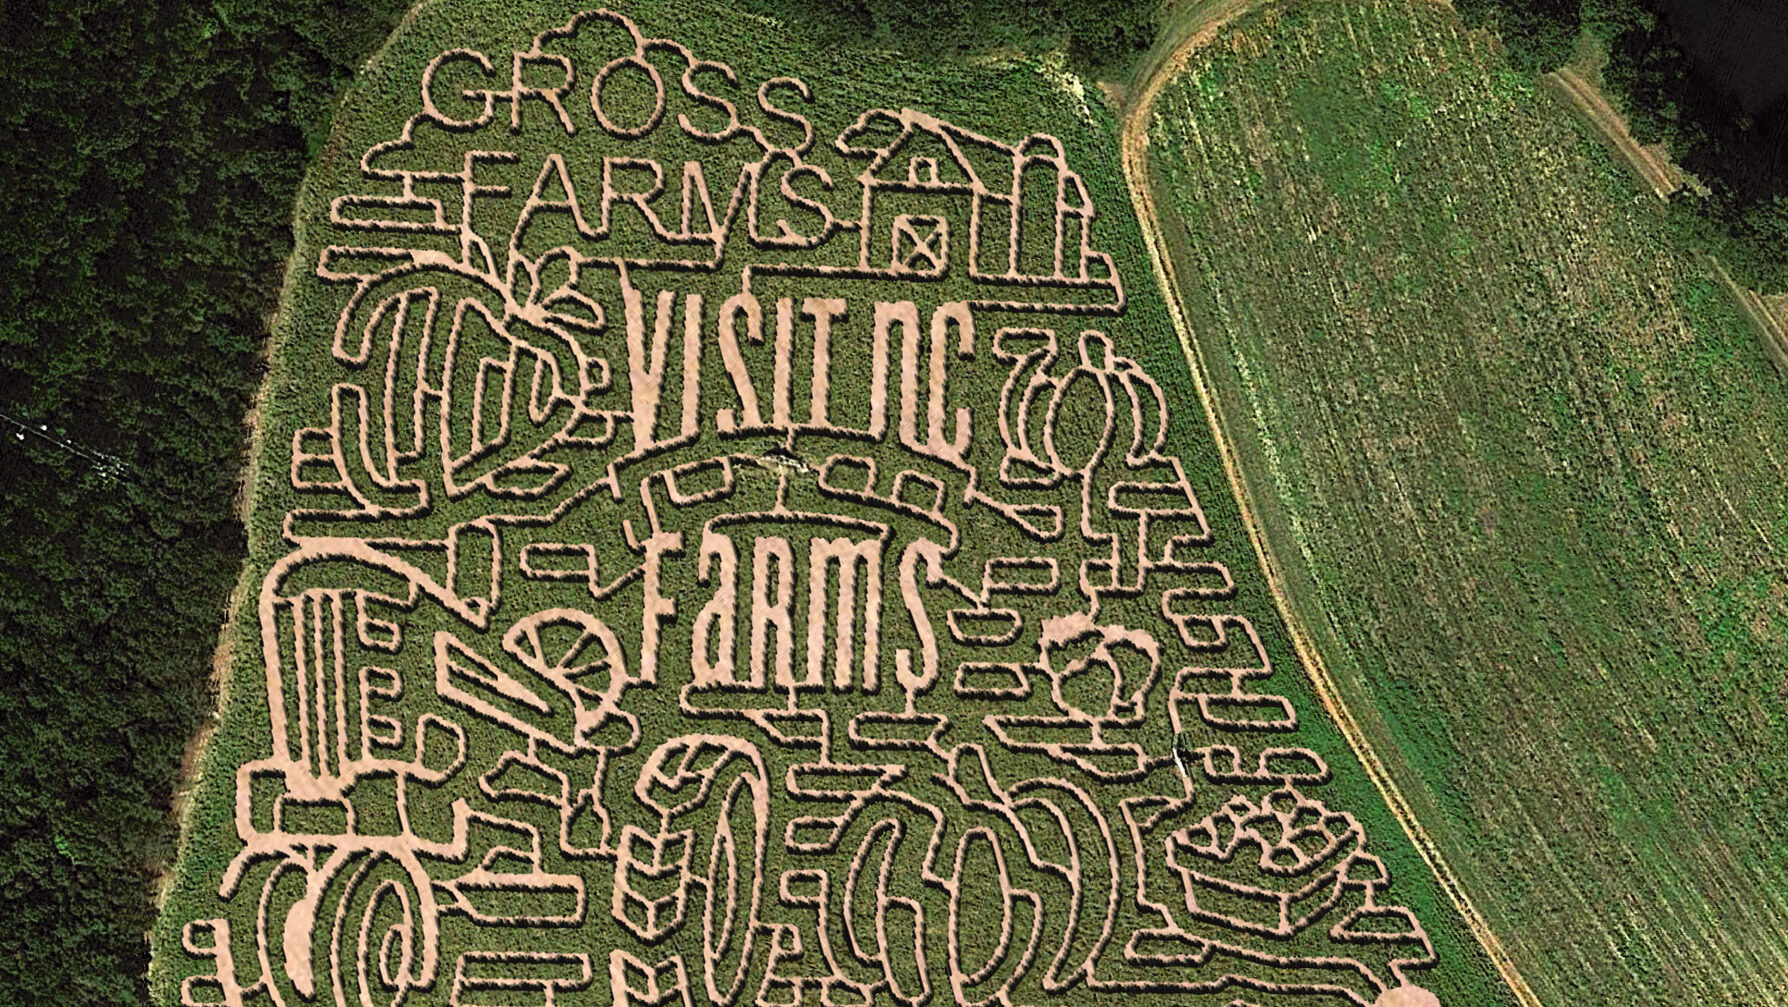 Aerial view of corn maze